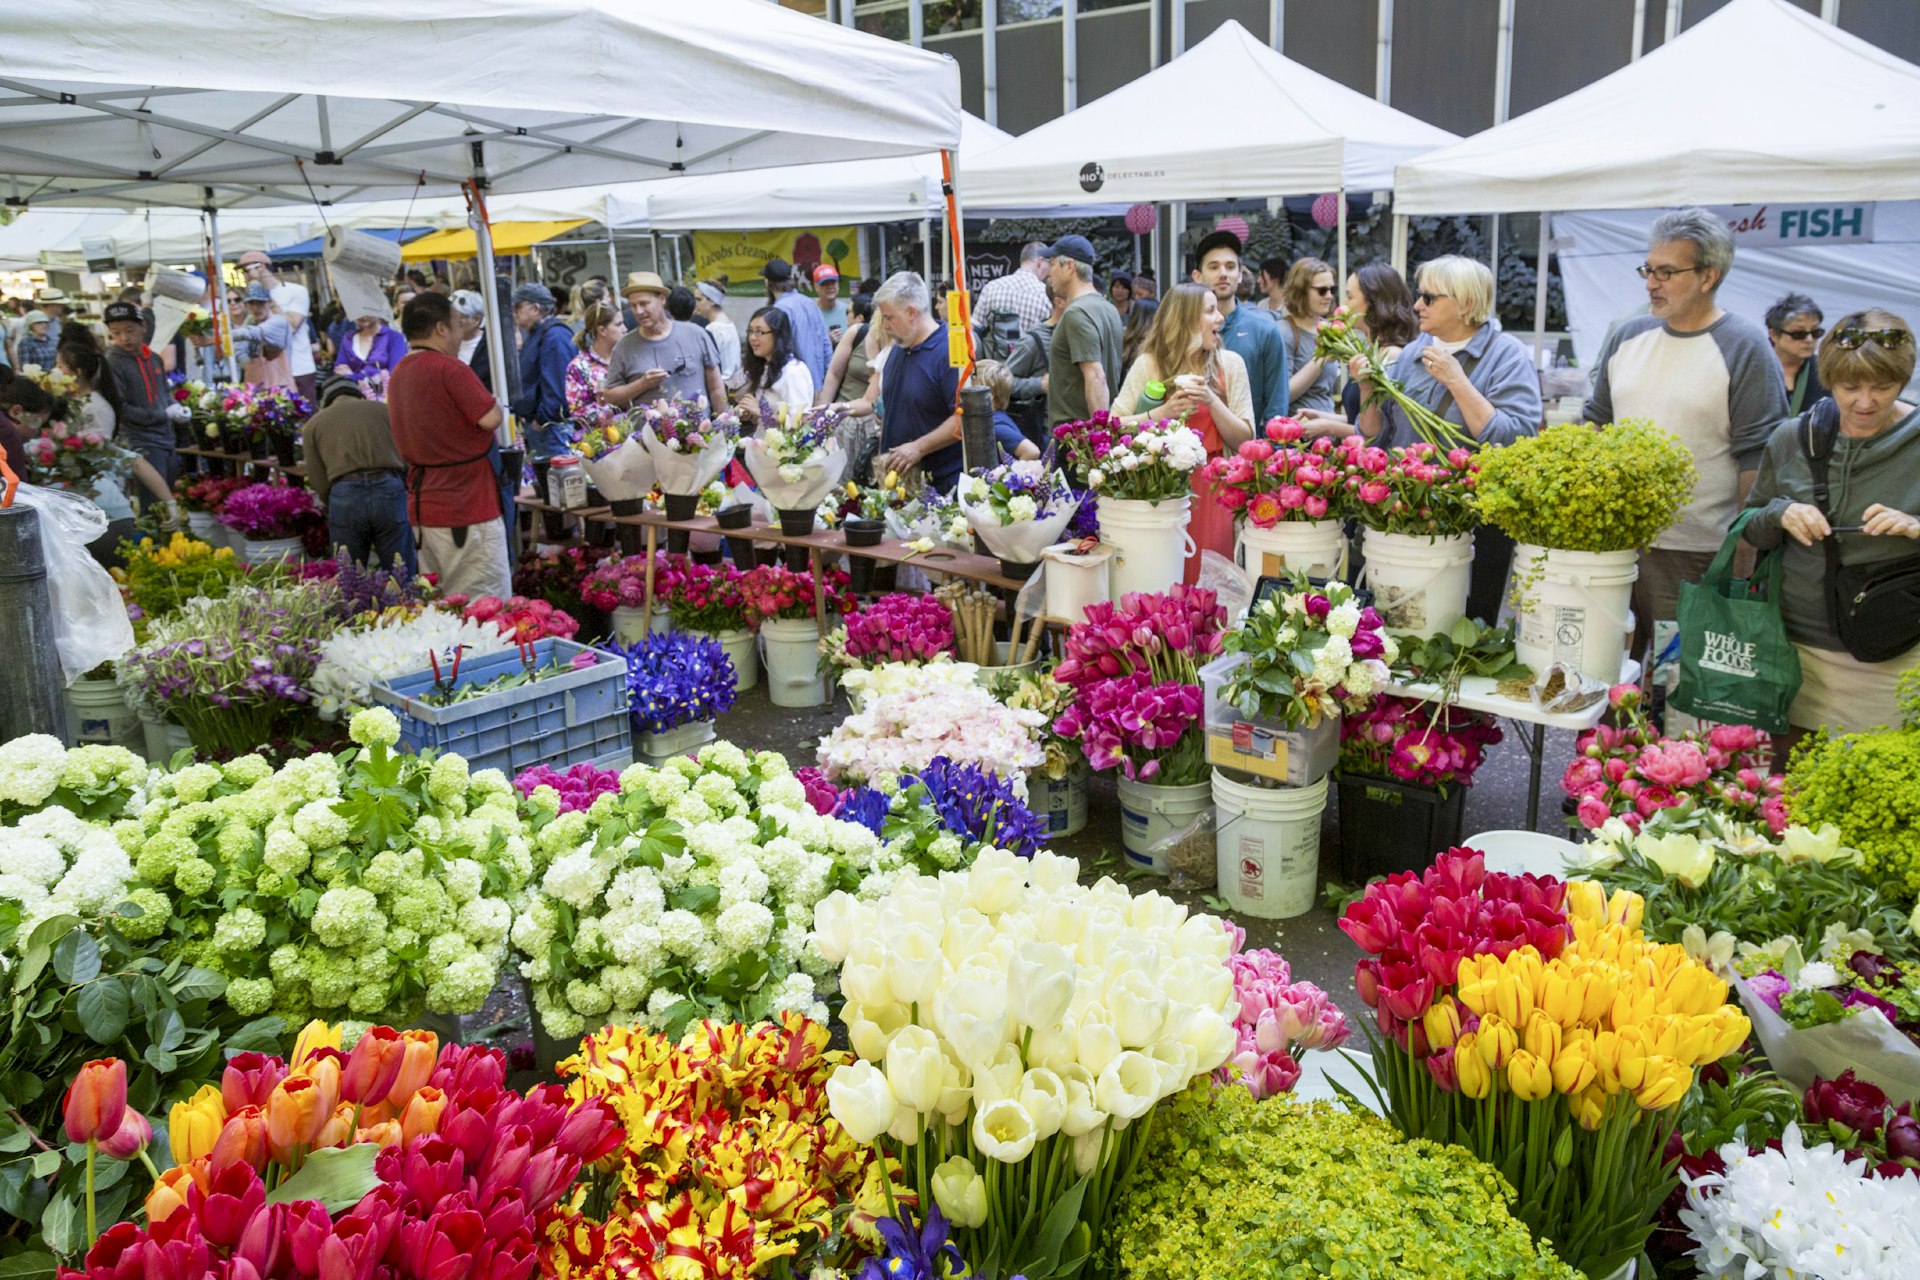 Features - Saturday Farmers Market in Spring, Portland, OR, USA